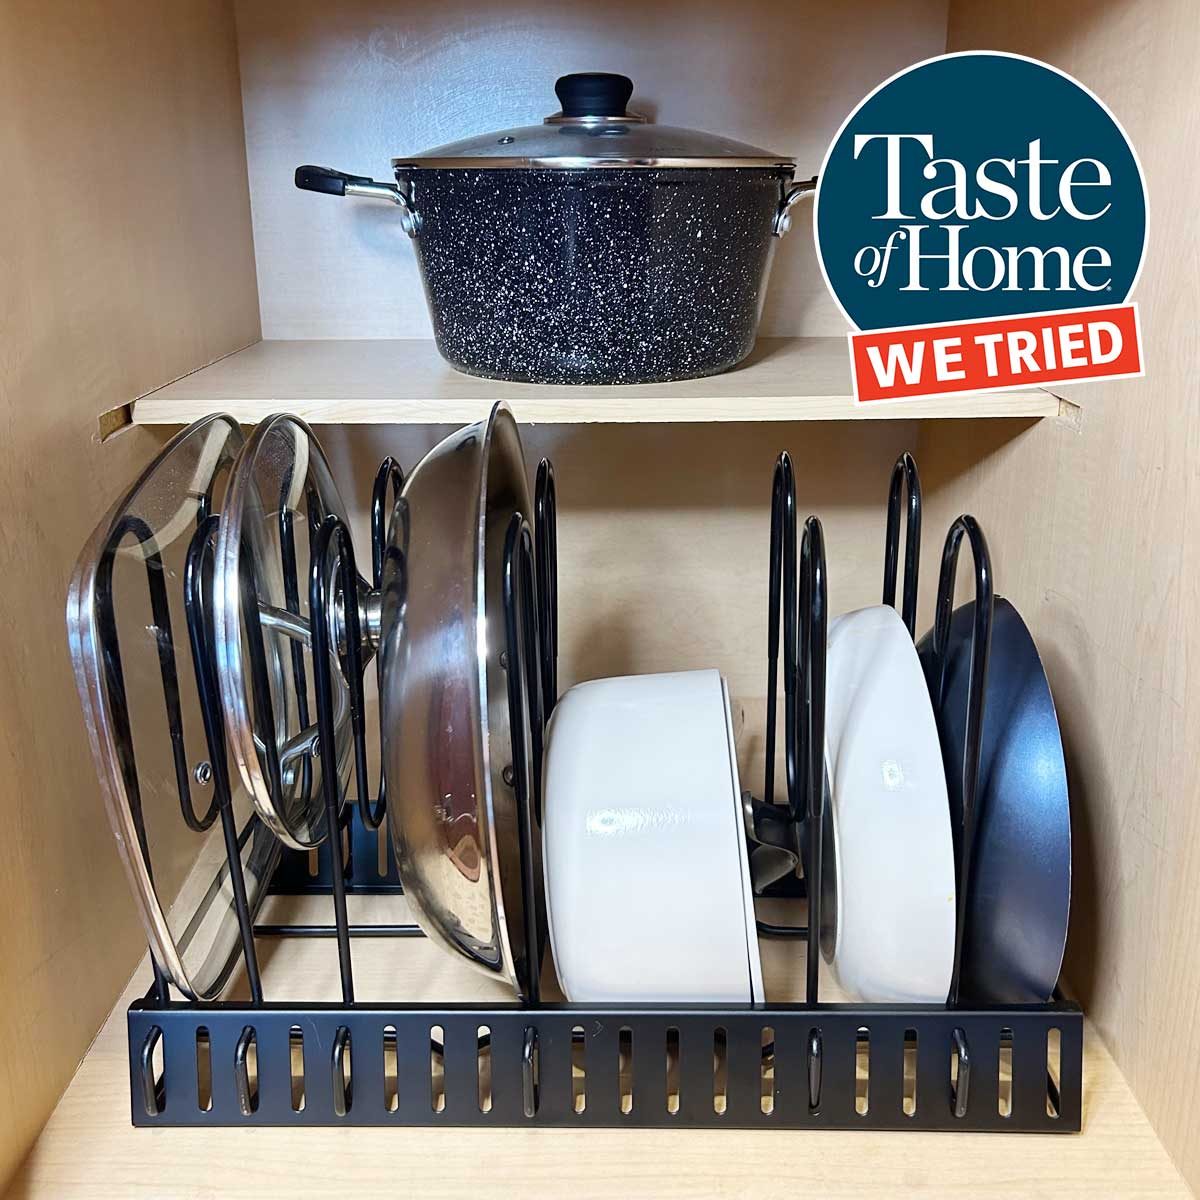 https://www.tasteofhome.com/wp-content/uploads/2022/06/TOH-We-Tried-pots-and-pans-organizer.jpg